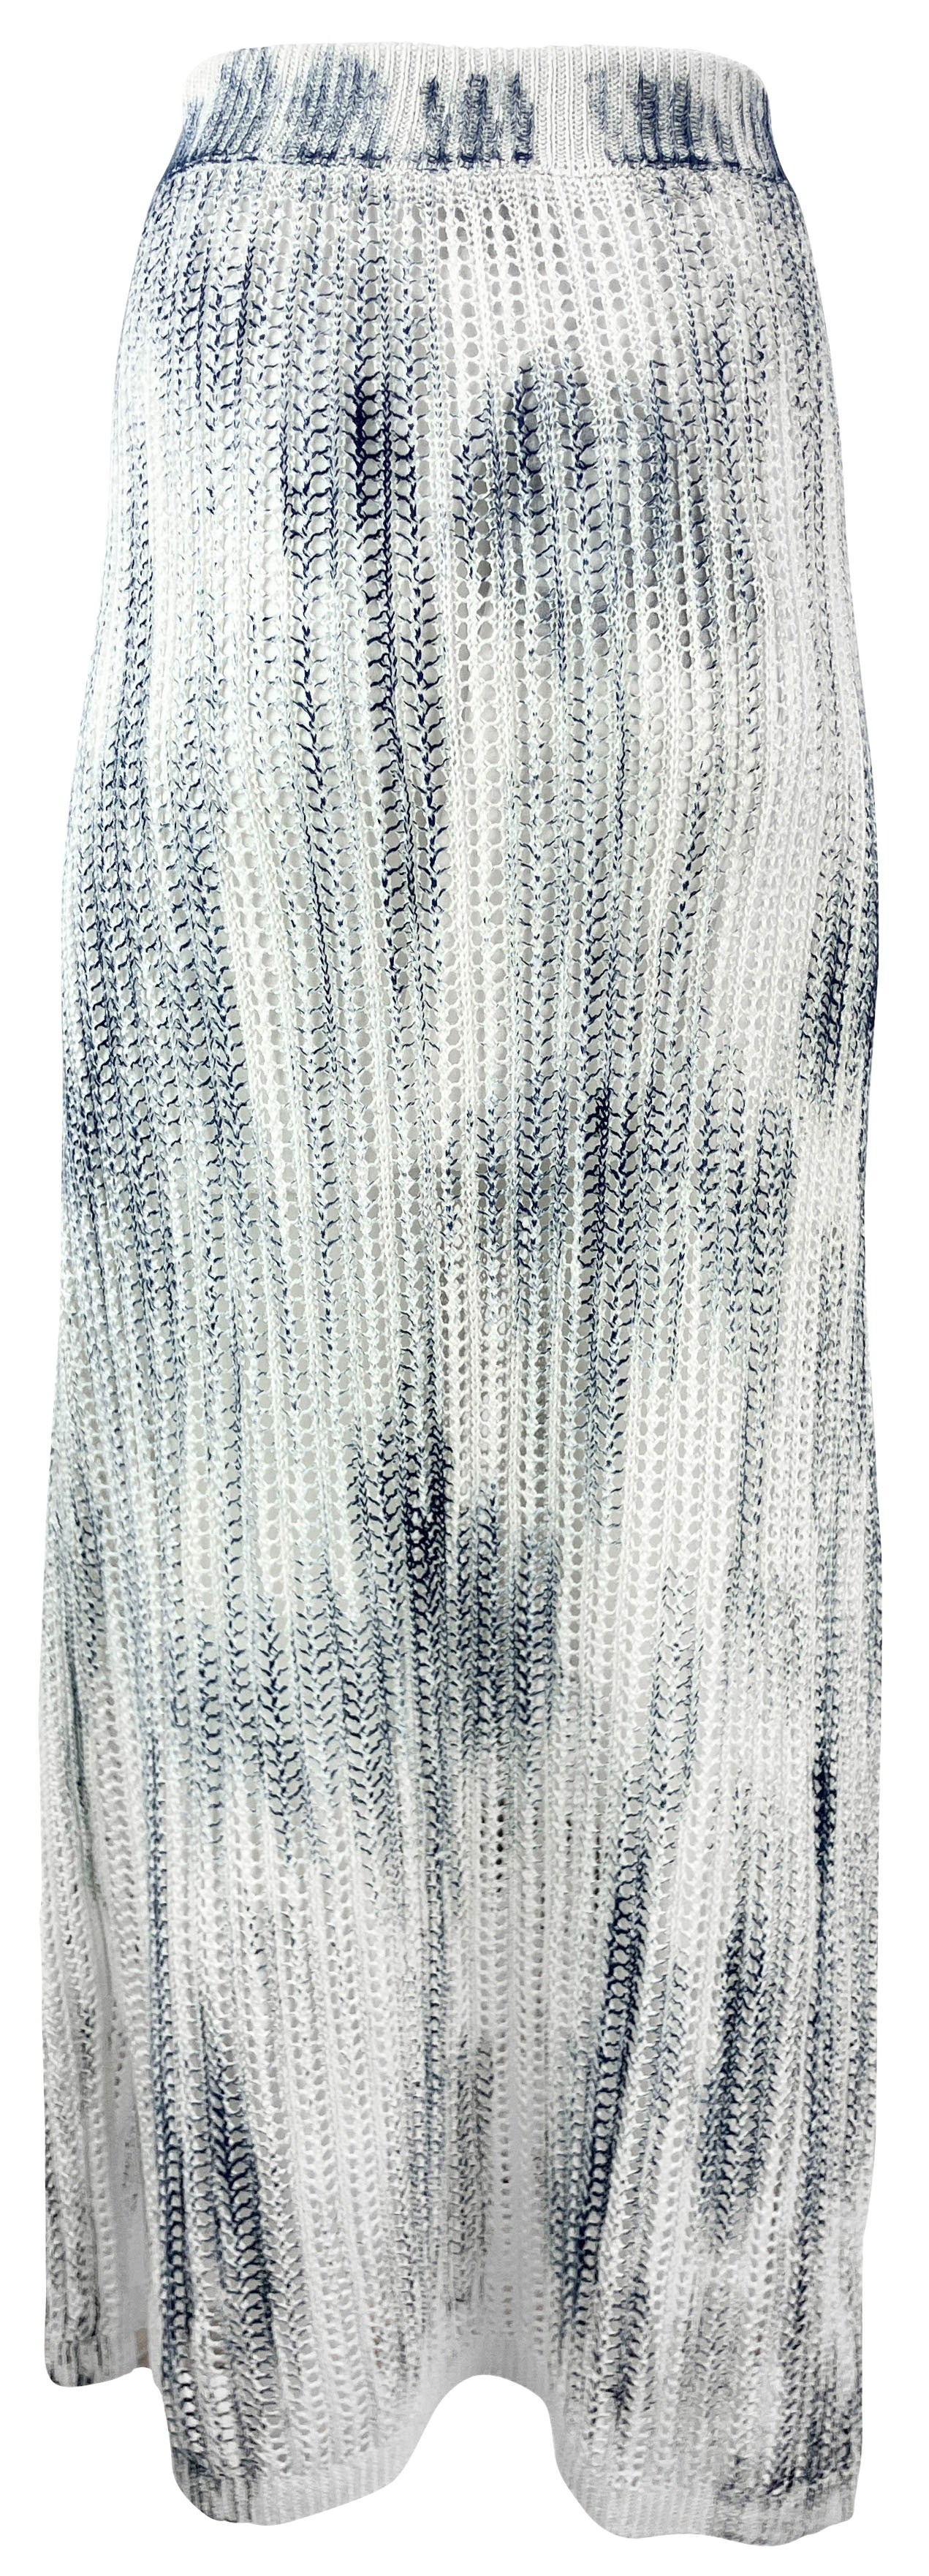 Avant Toi Ribbed Linen Skirt in White and Blue - Discounts on Avant Toi at UAL